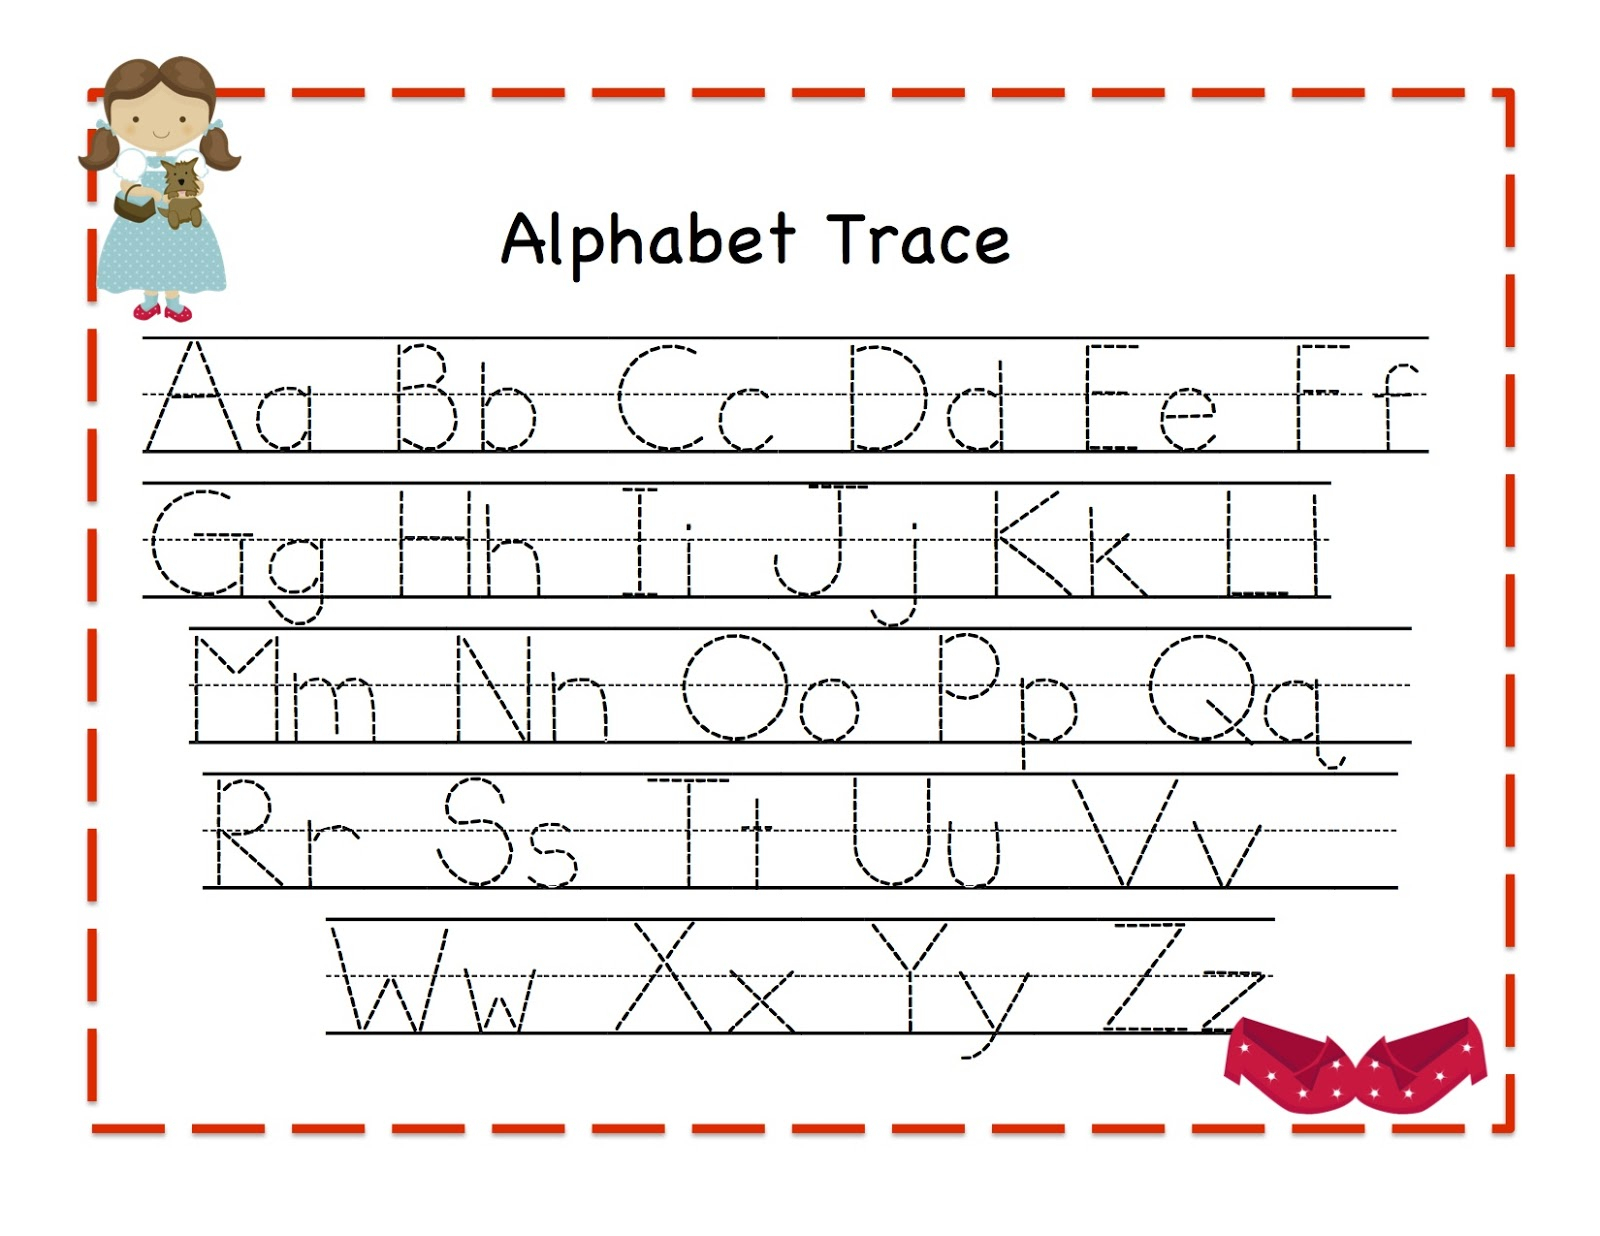 Printable Abc Tracing Letters